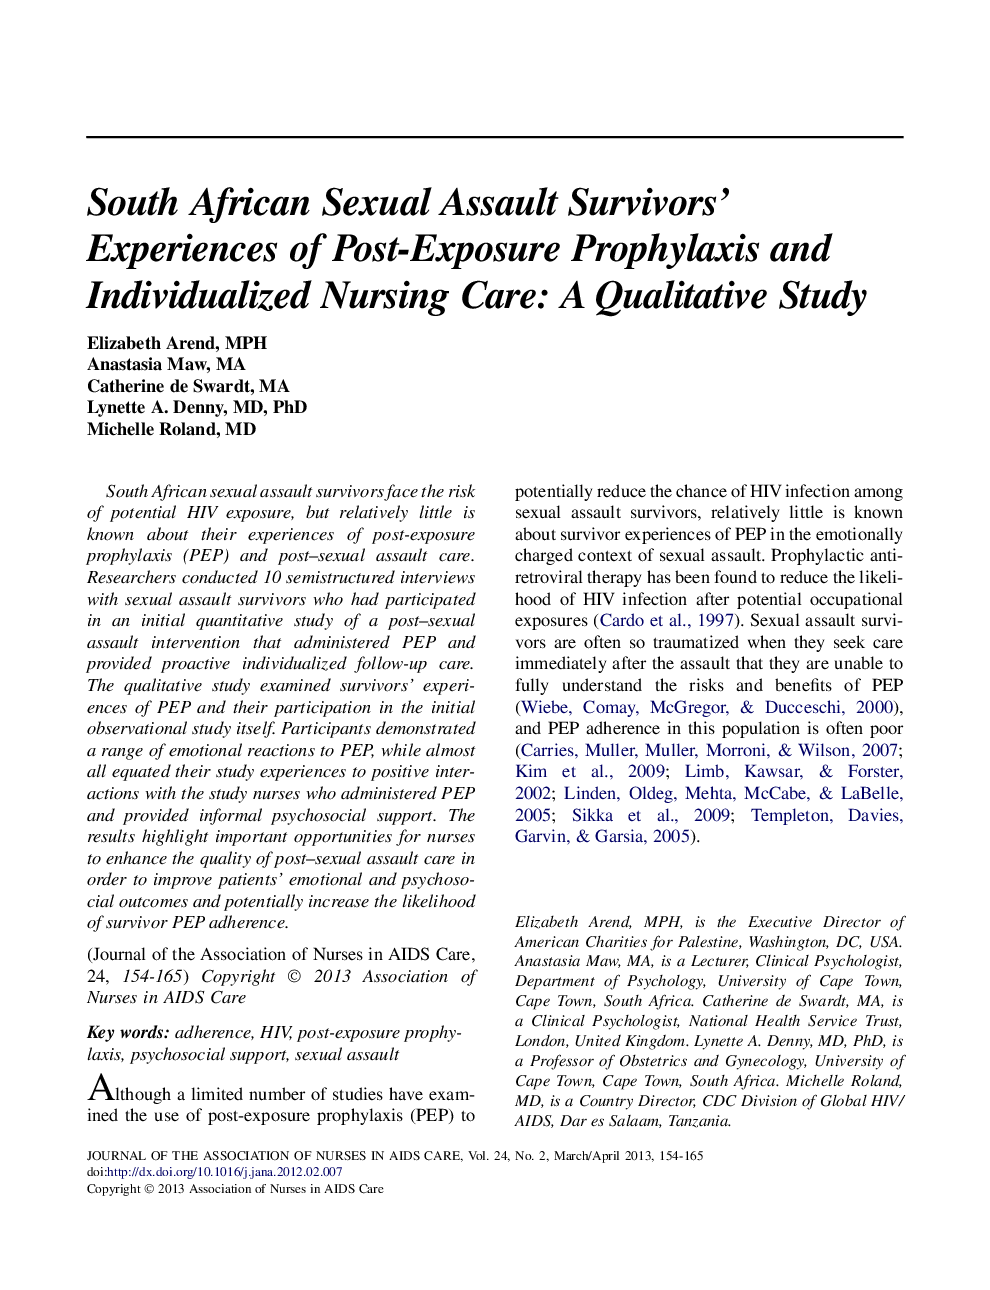 South African Sexual Assault Survivors' Experiences of Post-Exposure Prophylaxis and Individualized Nursing Care: A Qualitative Study